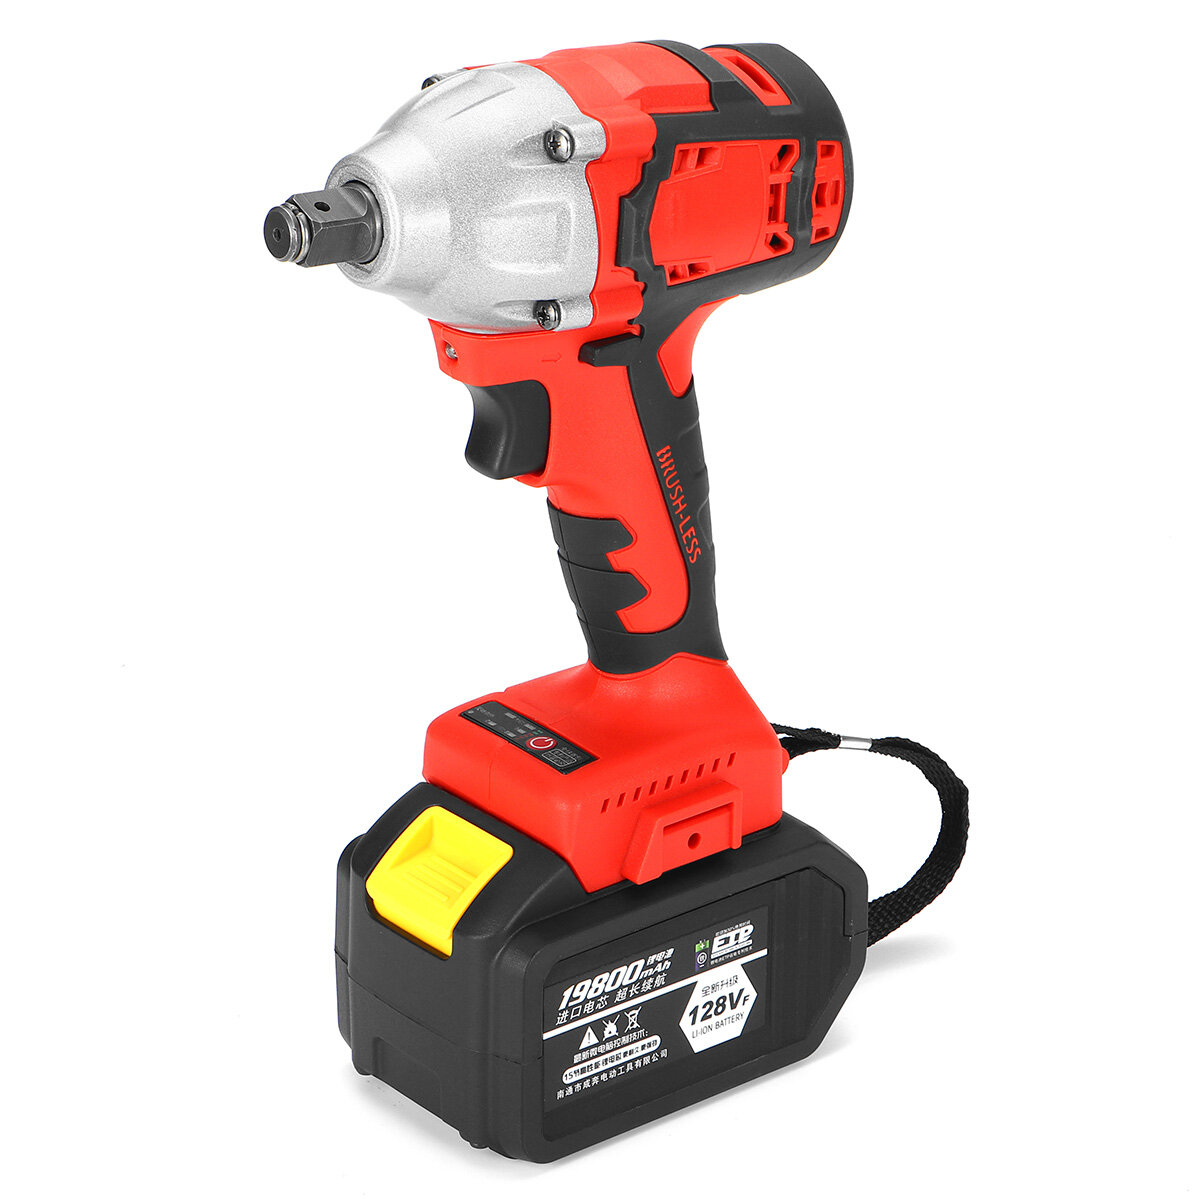 Image of 128VF 19800mah Electric Impact Wrench Brushless Cordless Drill Tool With Battery